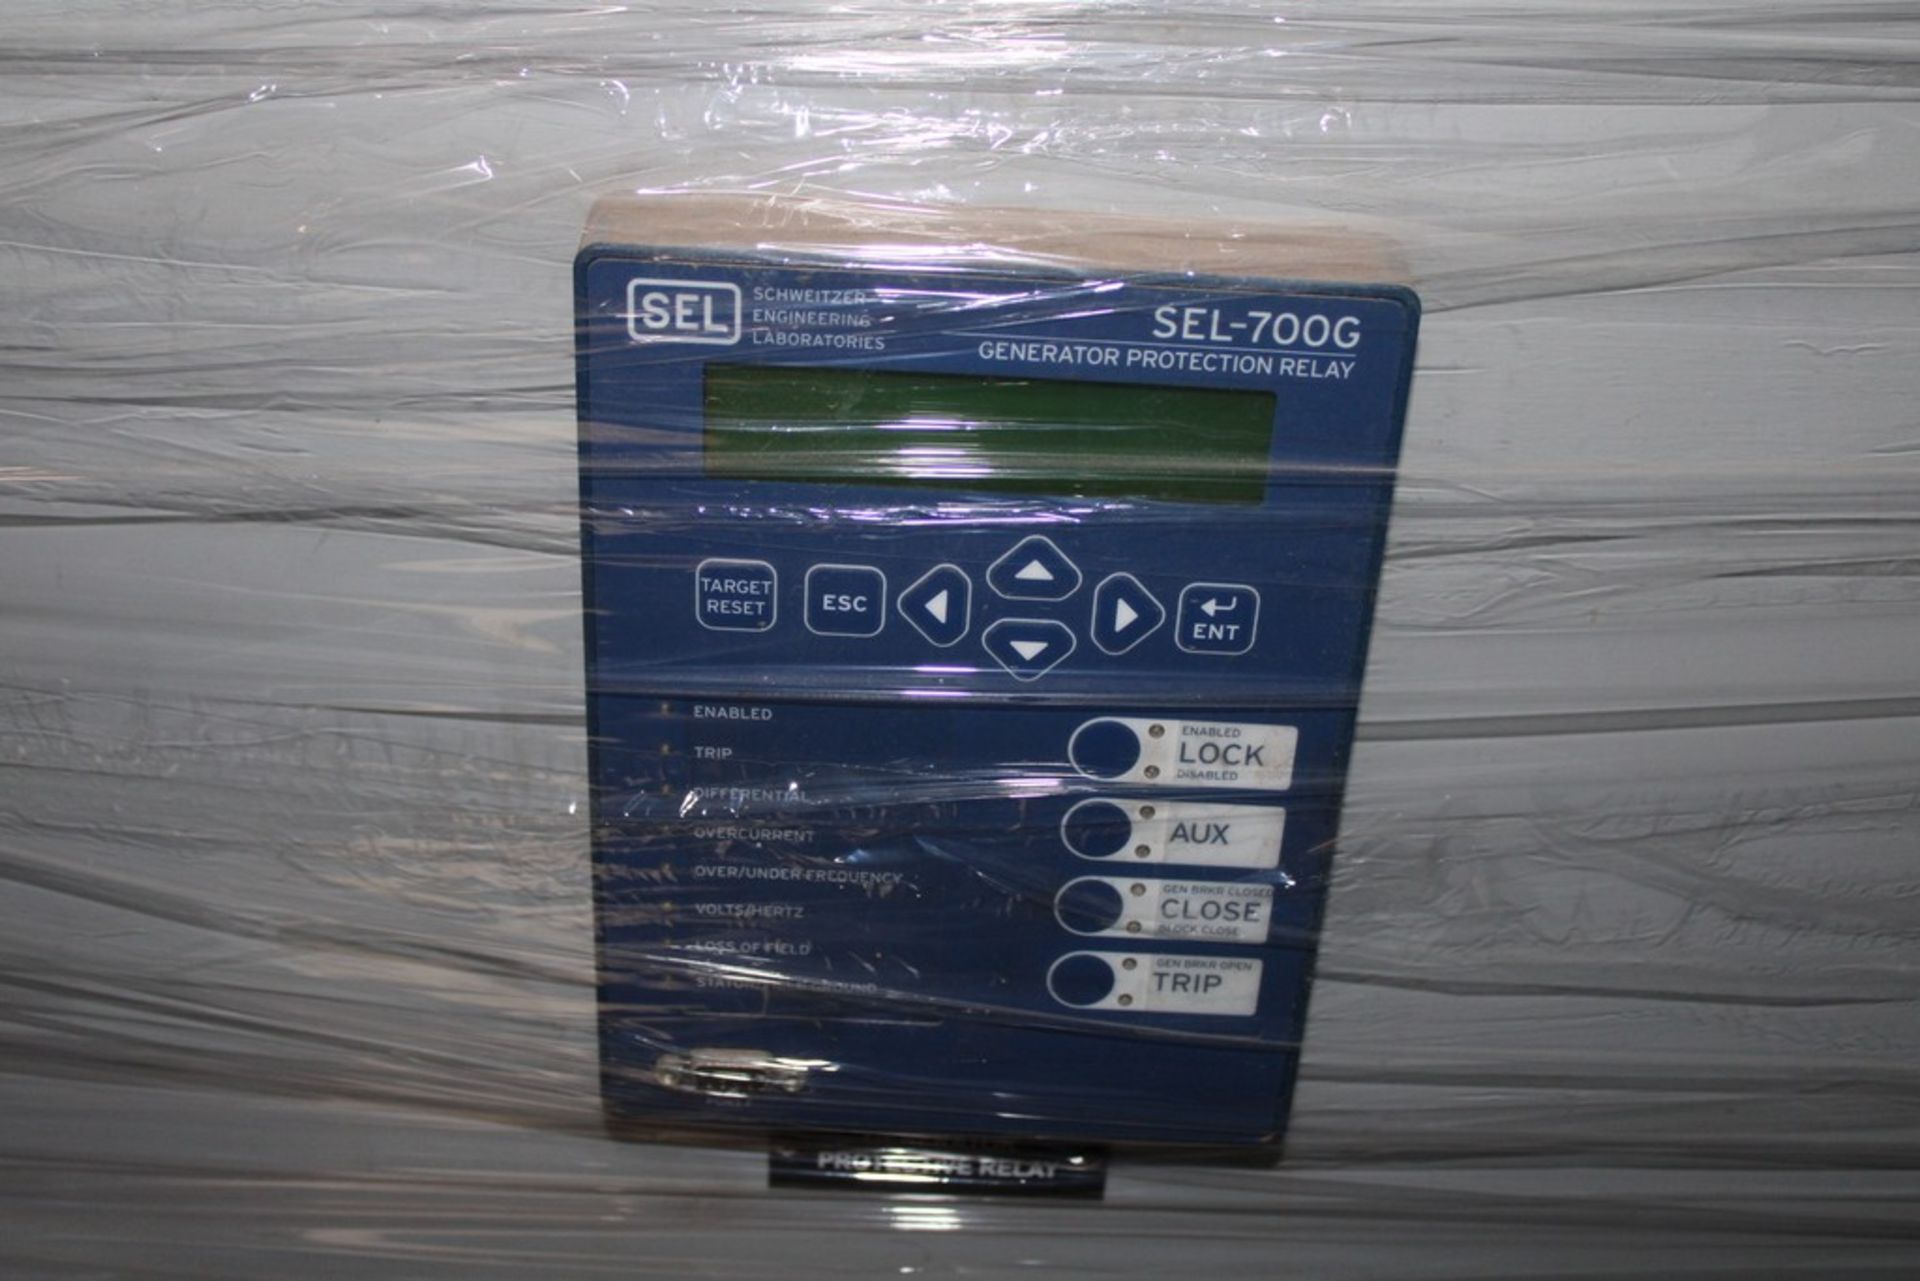 (4) POWEROHM MODEL P17636-53-TB6X53 BOXES WITH SCHWEITZER SEL-7000 GENERATOR PROTECTION RELAY - Image 2 of 2